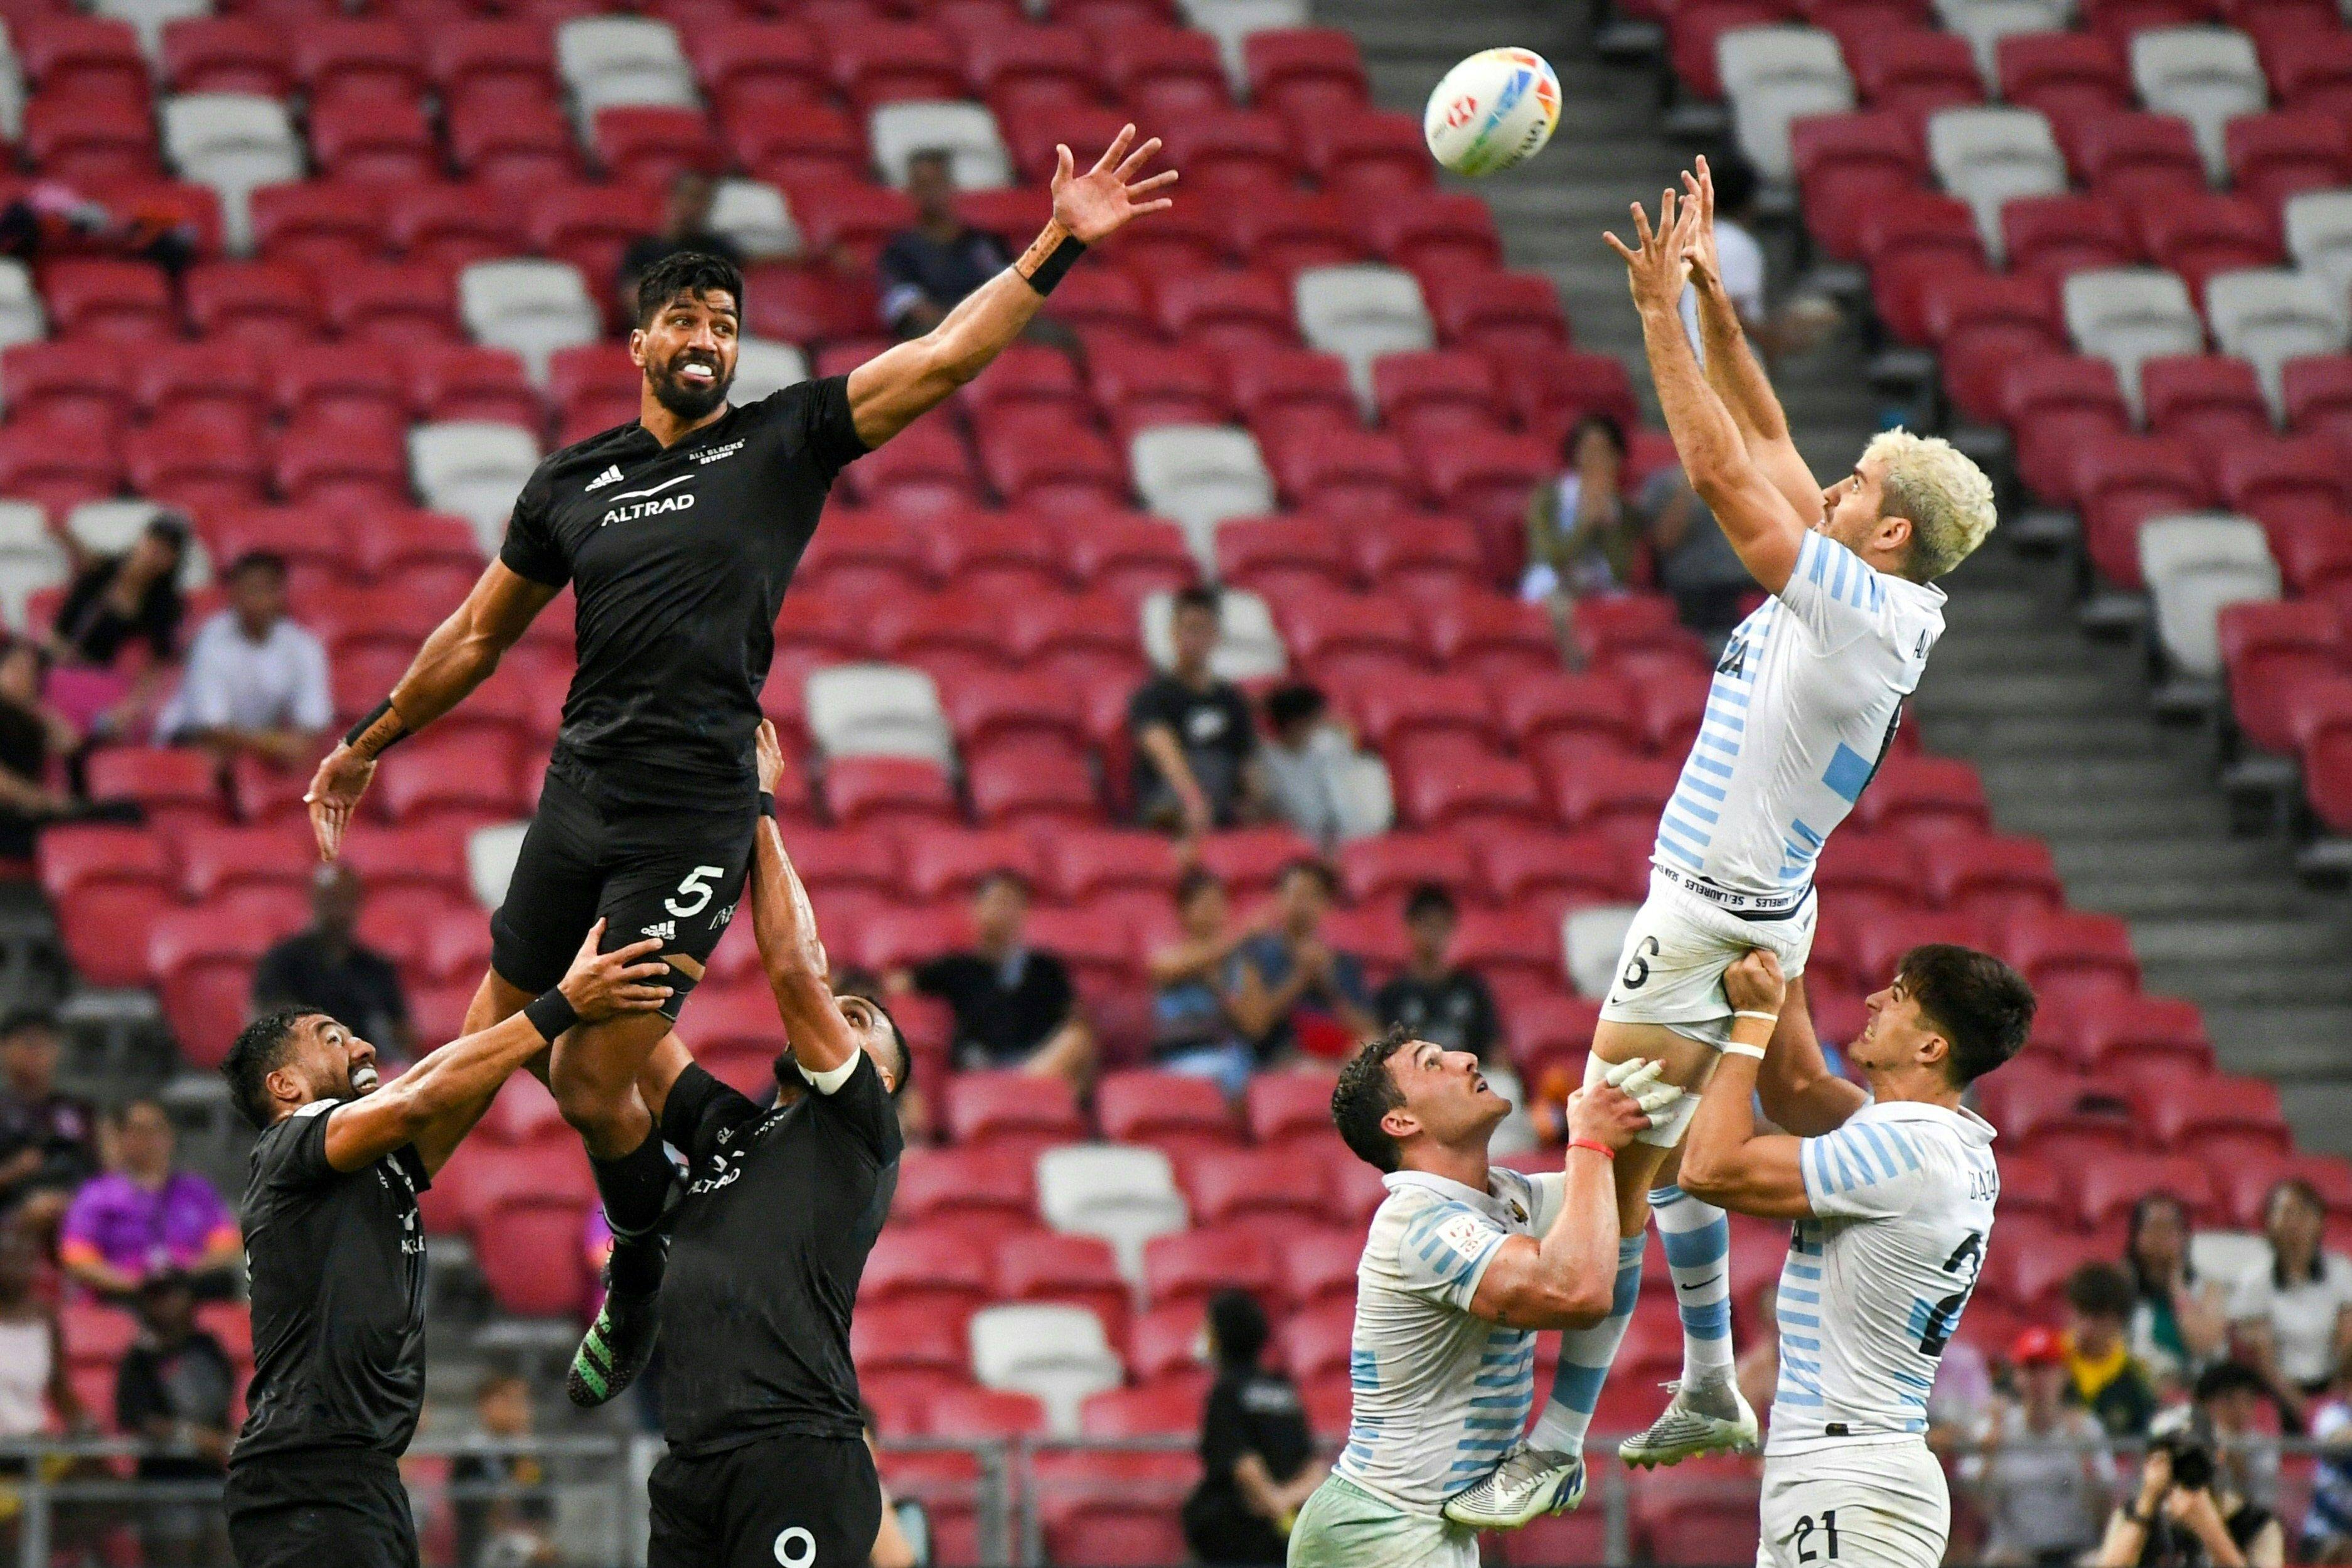 Dylan Collier is convinced New Zealand have what it takes to retain their Hong Kong title, despite a poor recent run. Photo: AFP